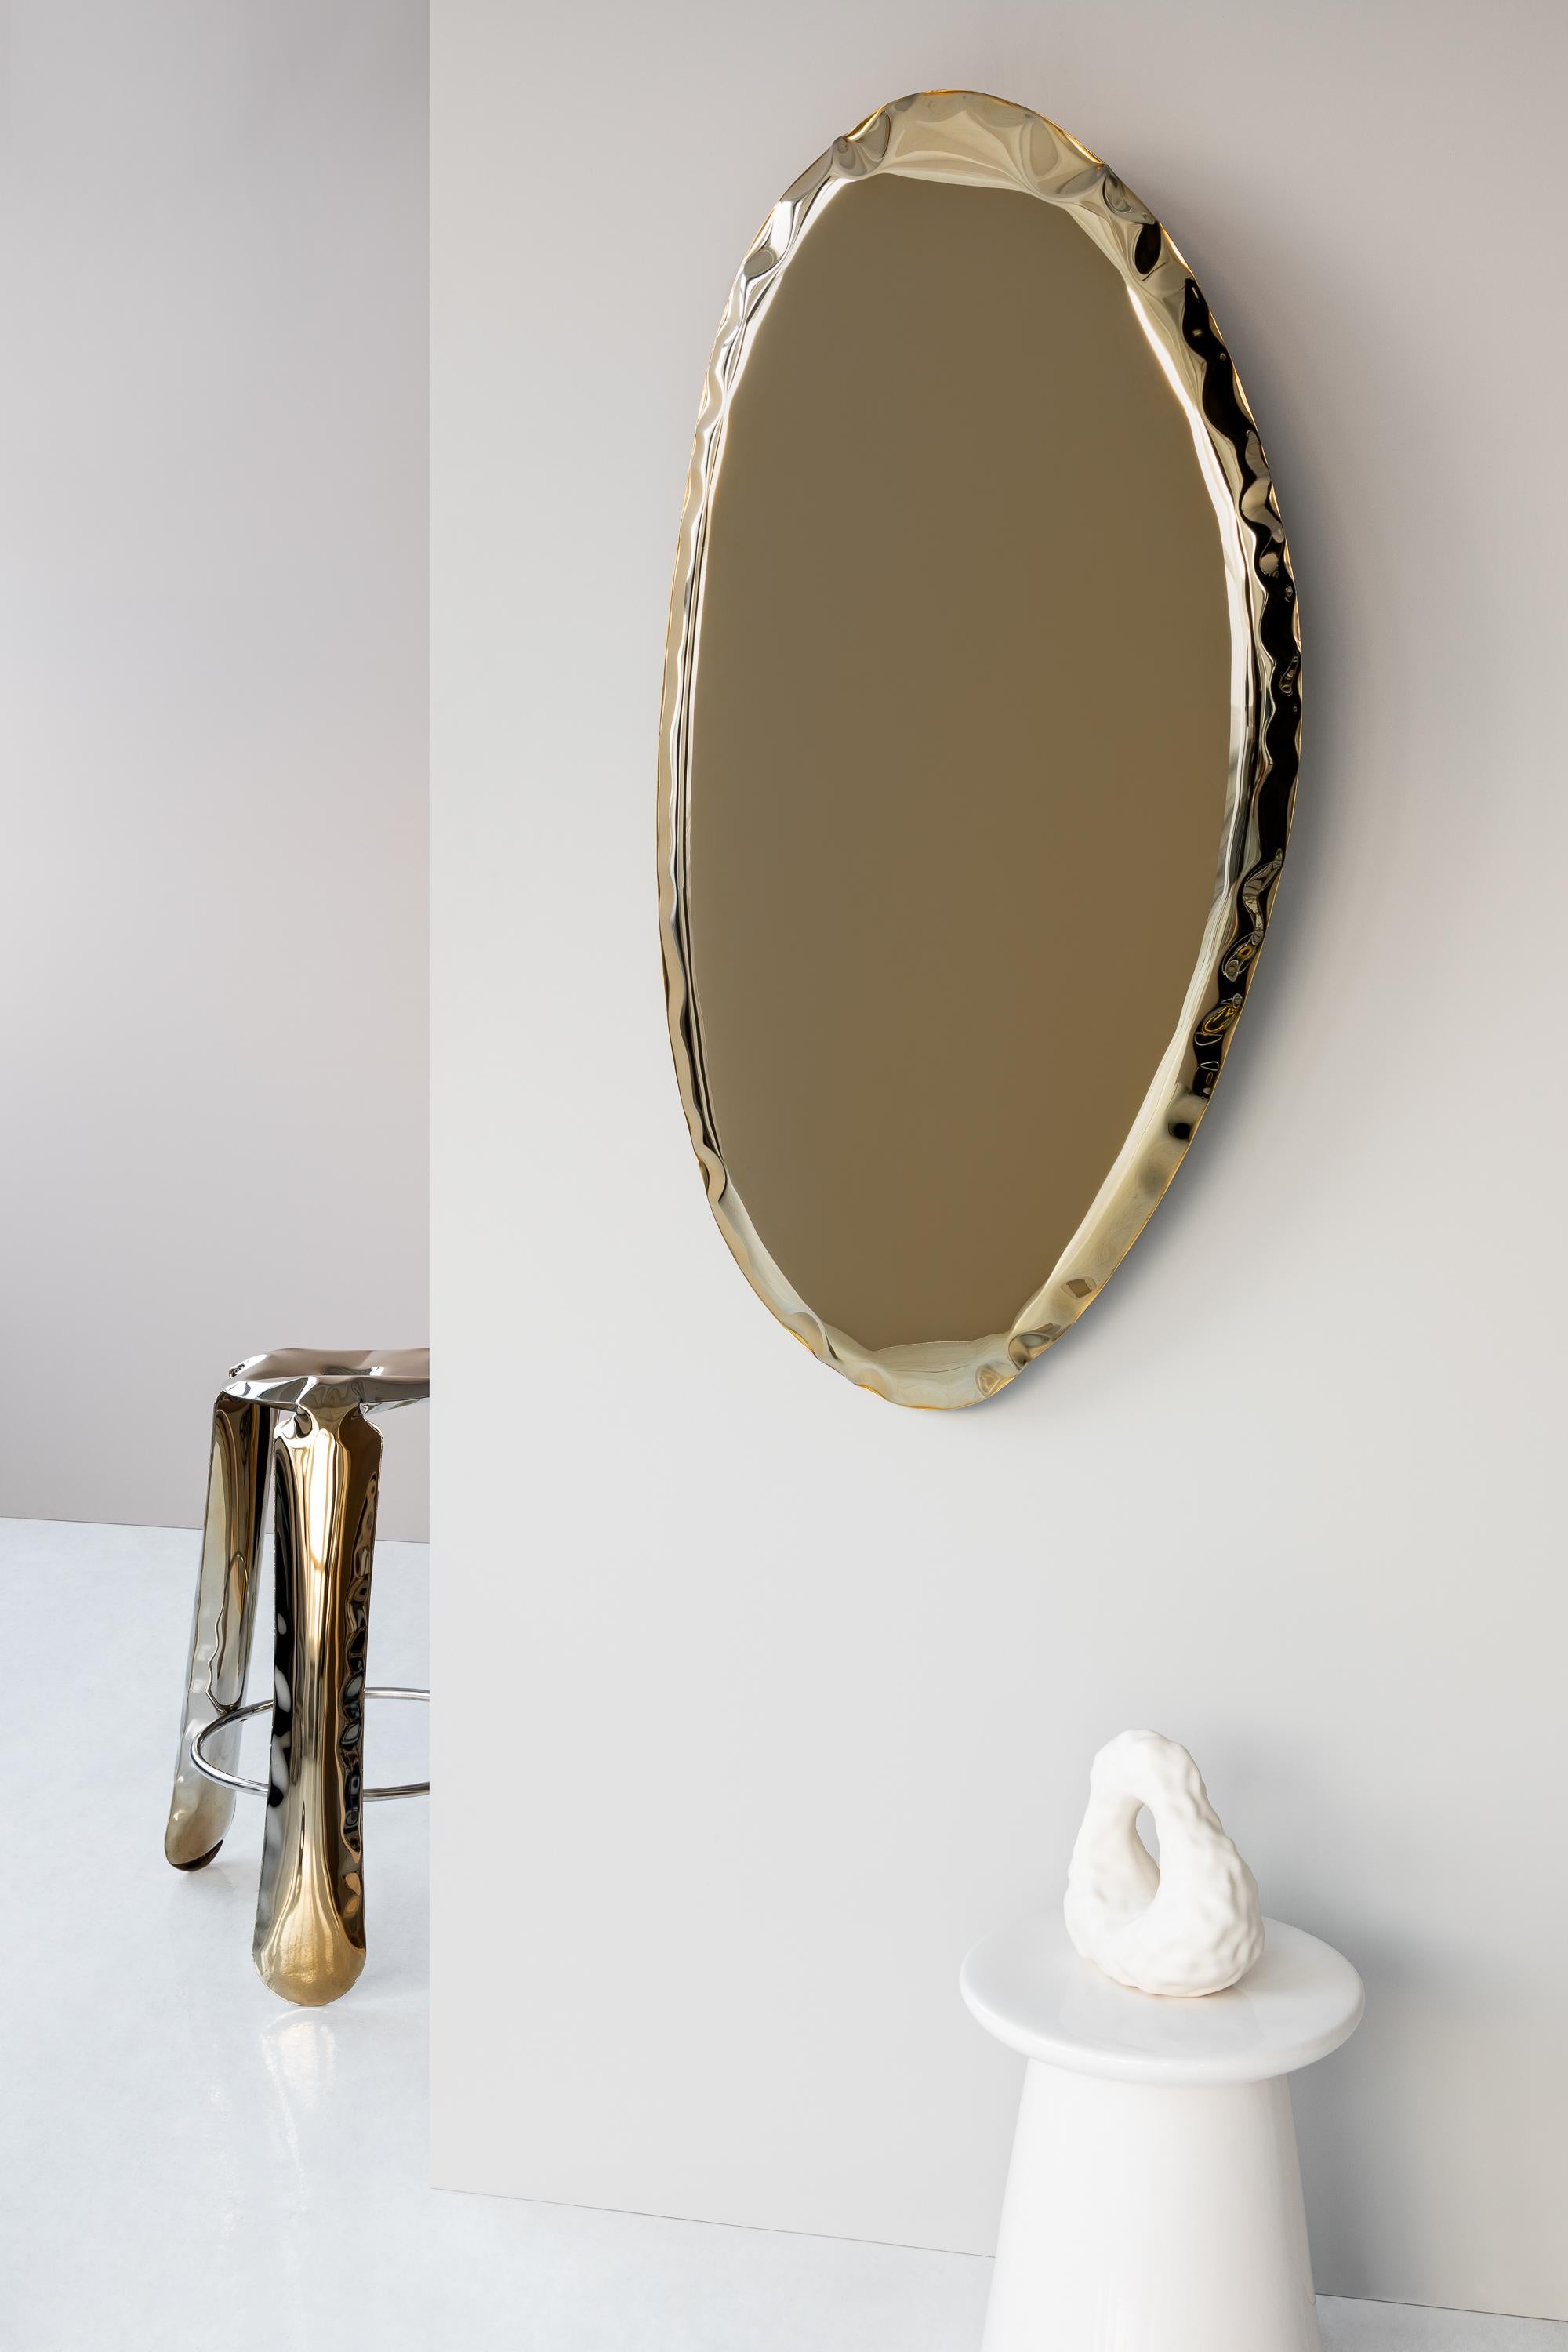 Contemporary Rose Gold Tafla O2 Wall Mirror by Zieta For Sale